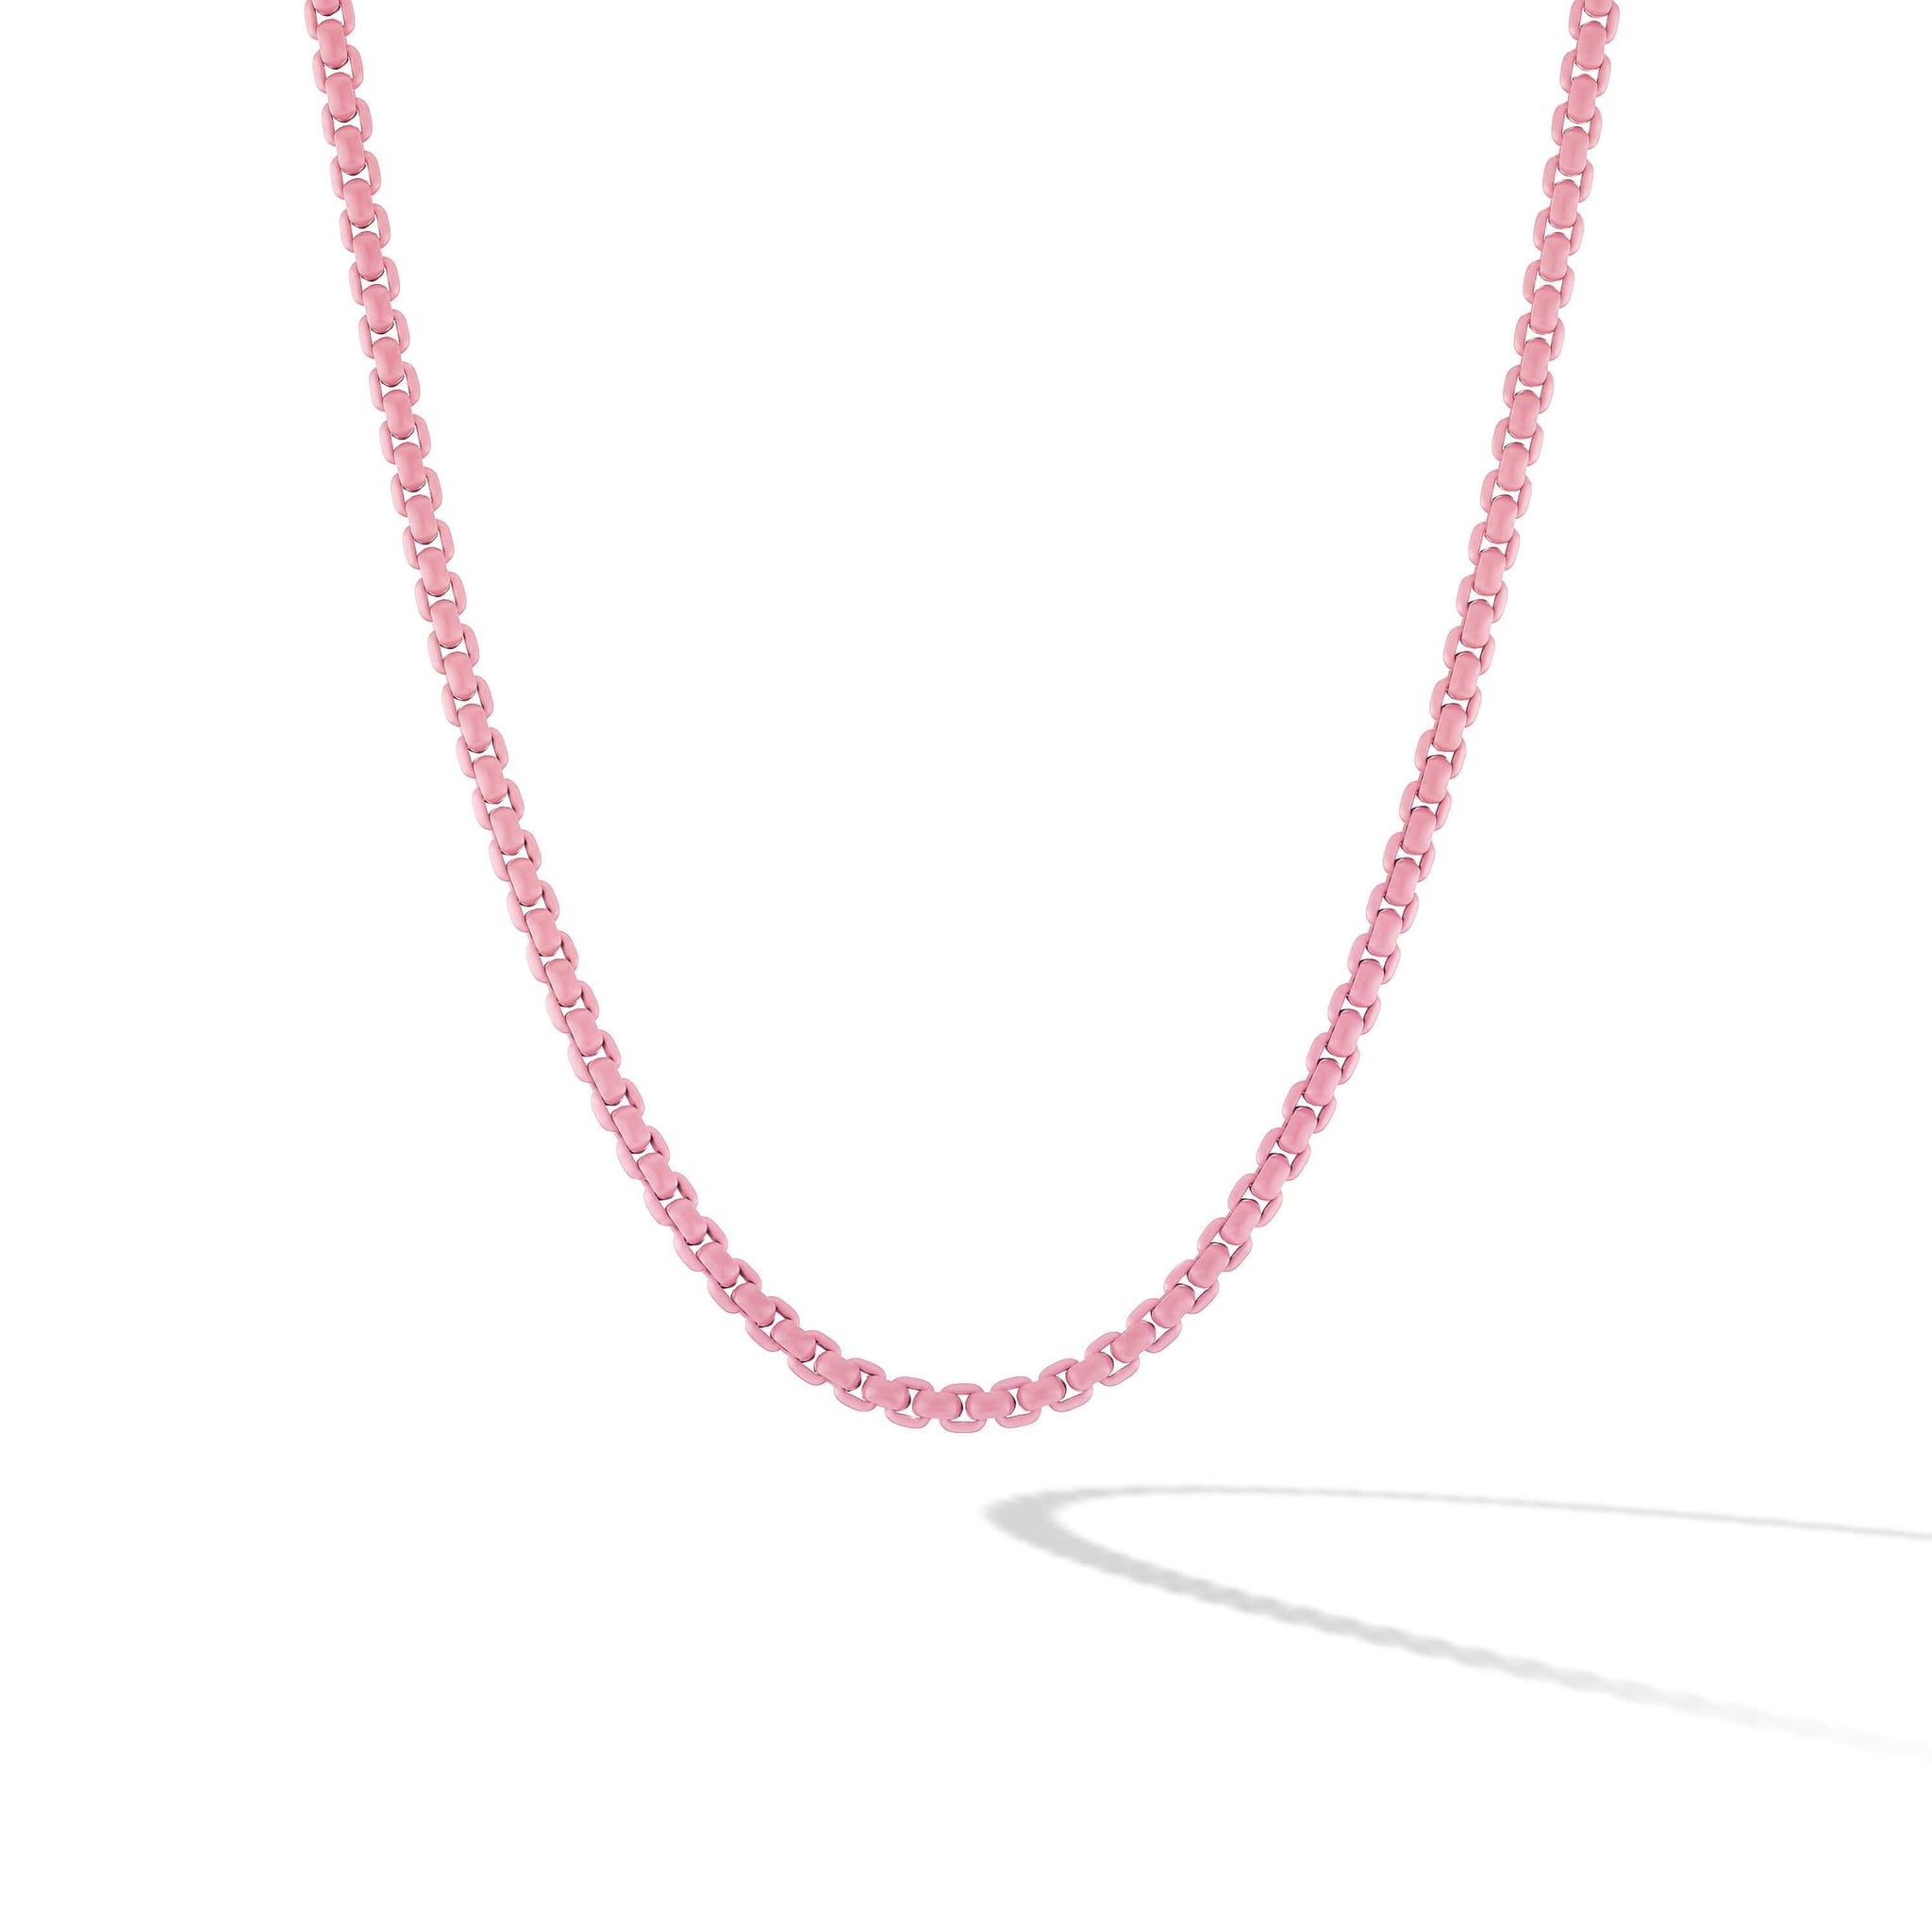 DY Bel Aire Box Chain Necklace in Blush with 14K Yellow Gold Accent